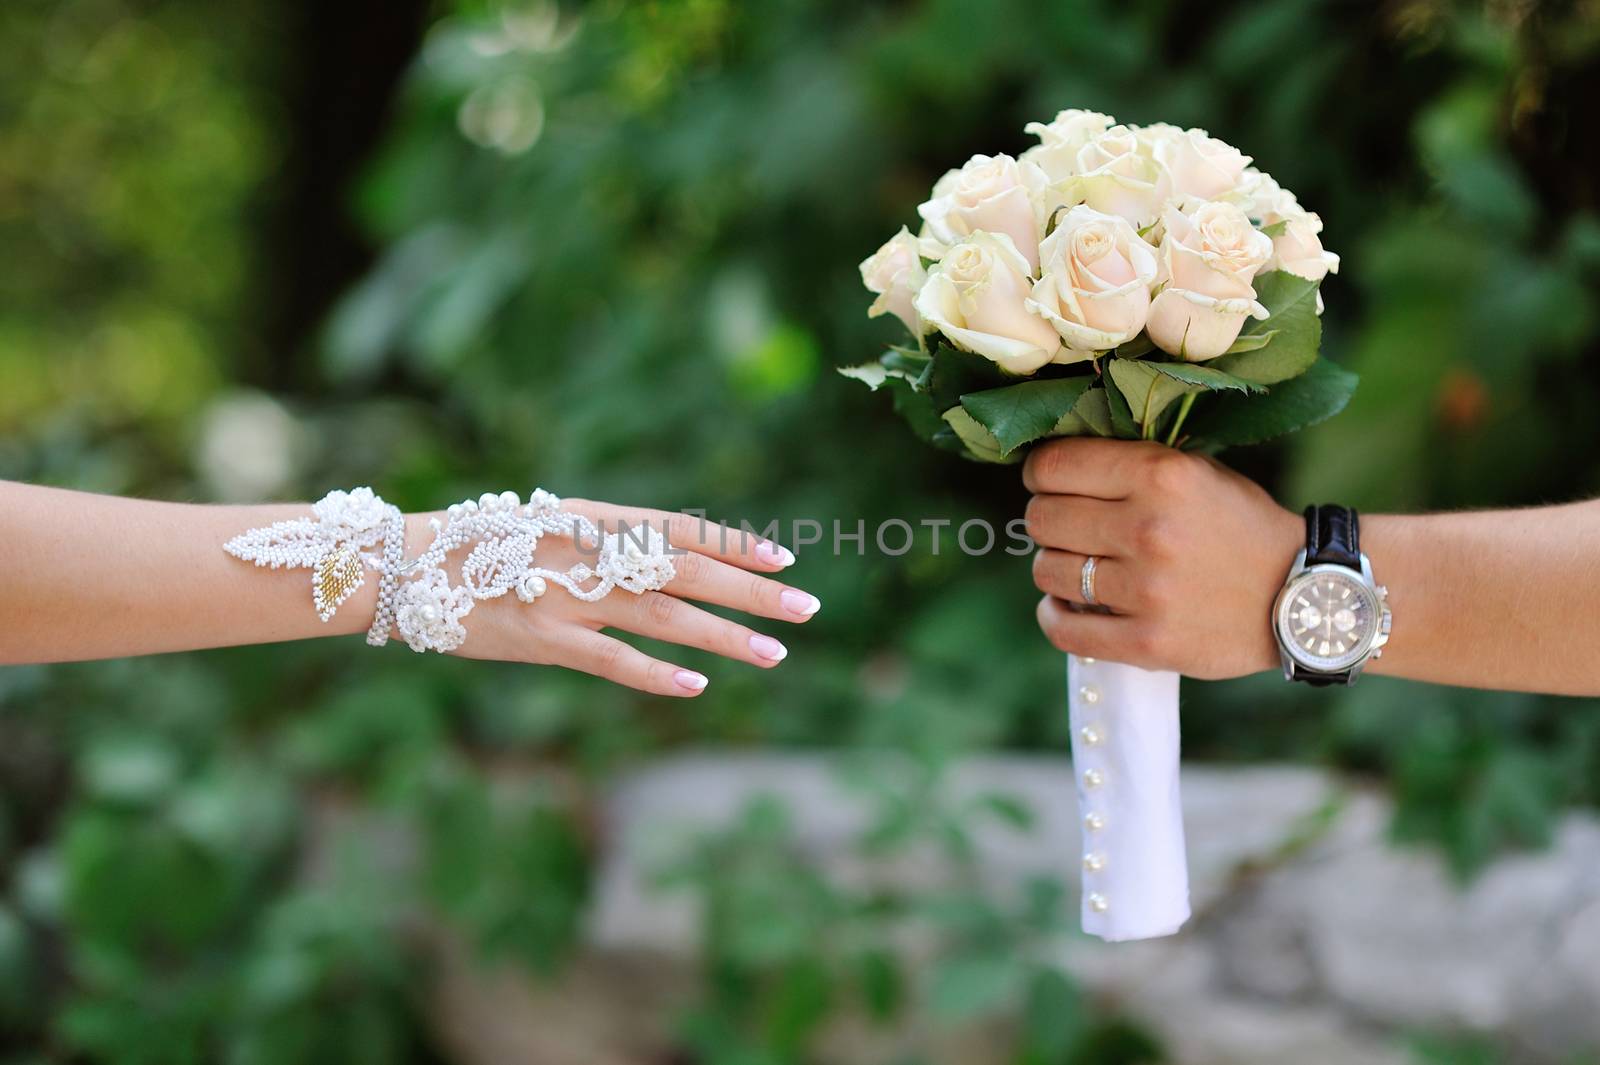 Groom transmits give bride wedding bouquet of white roses.